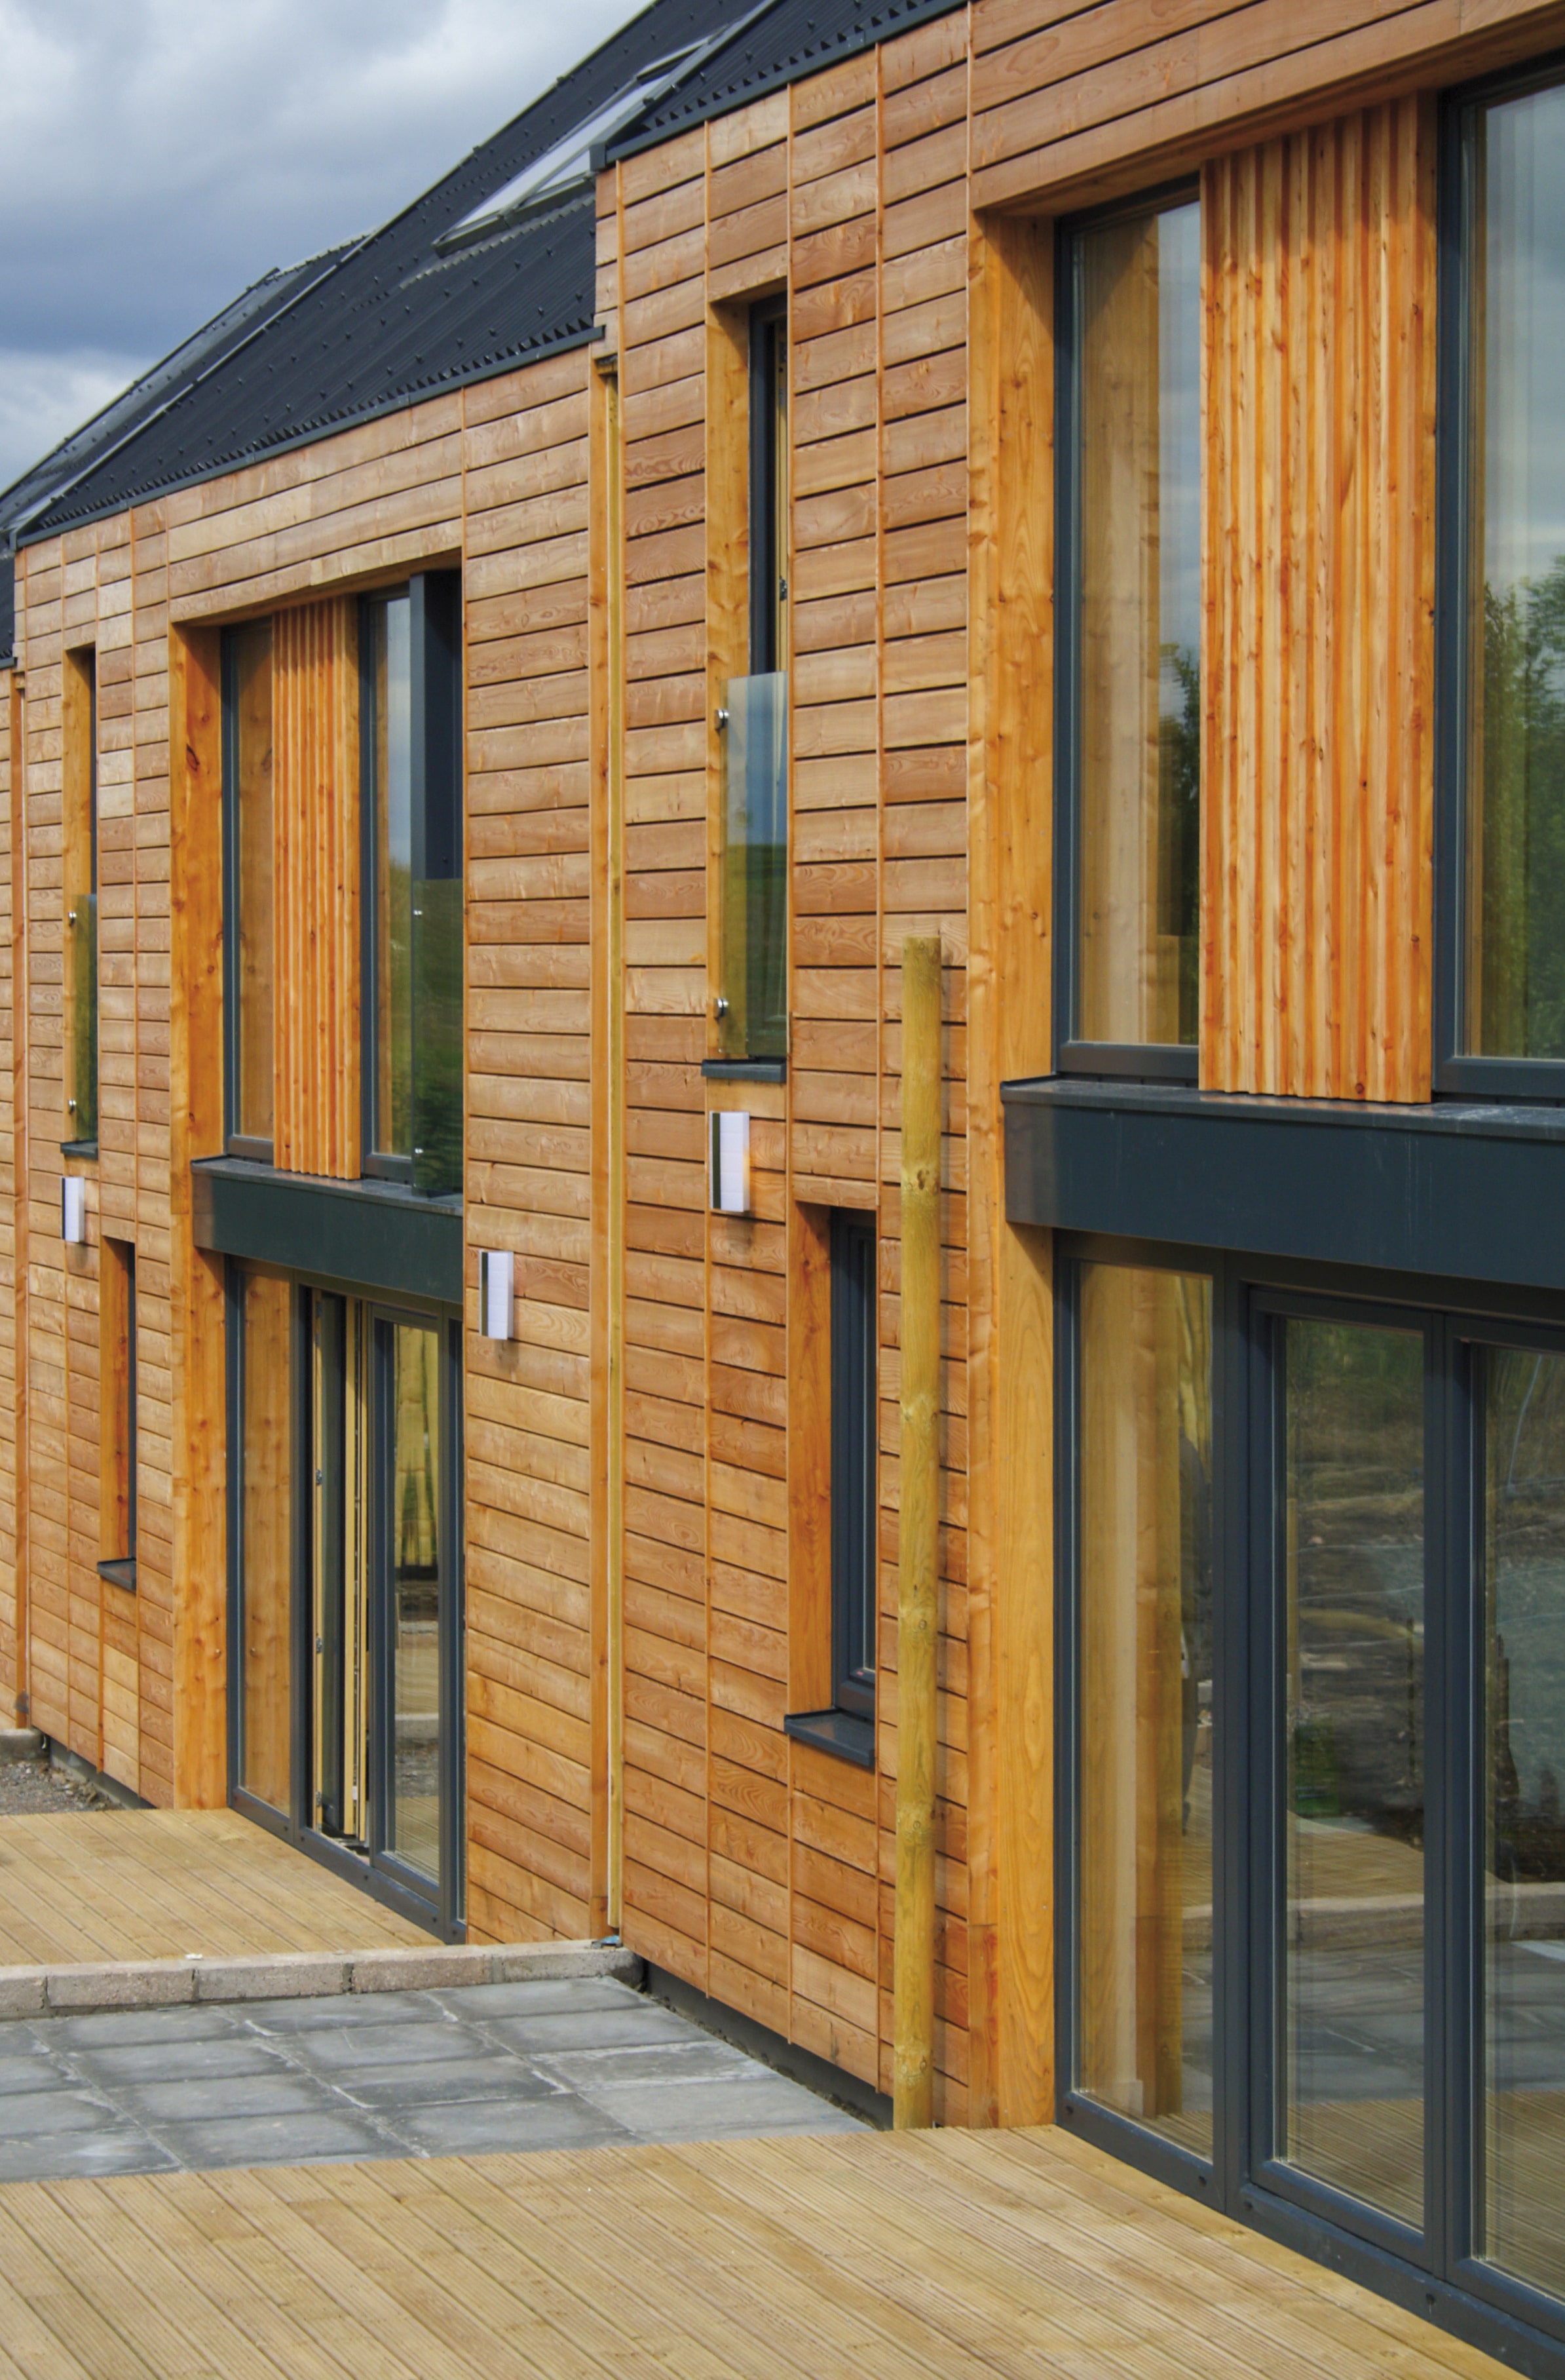 Aquadecks applied to wooden cladding